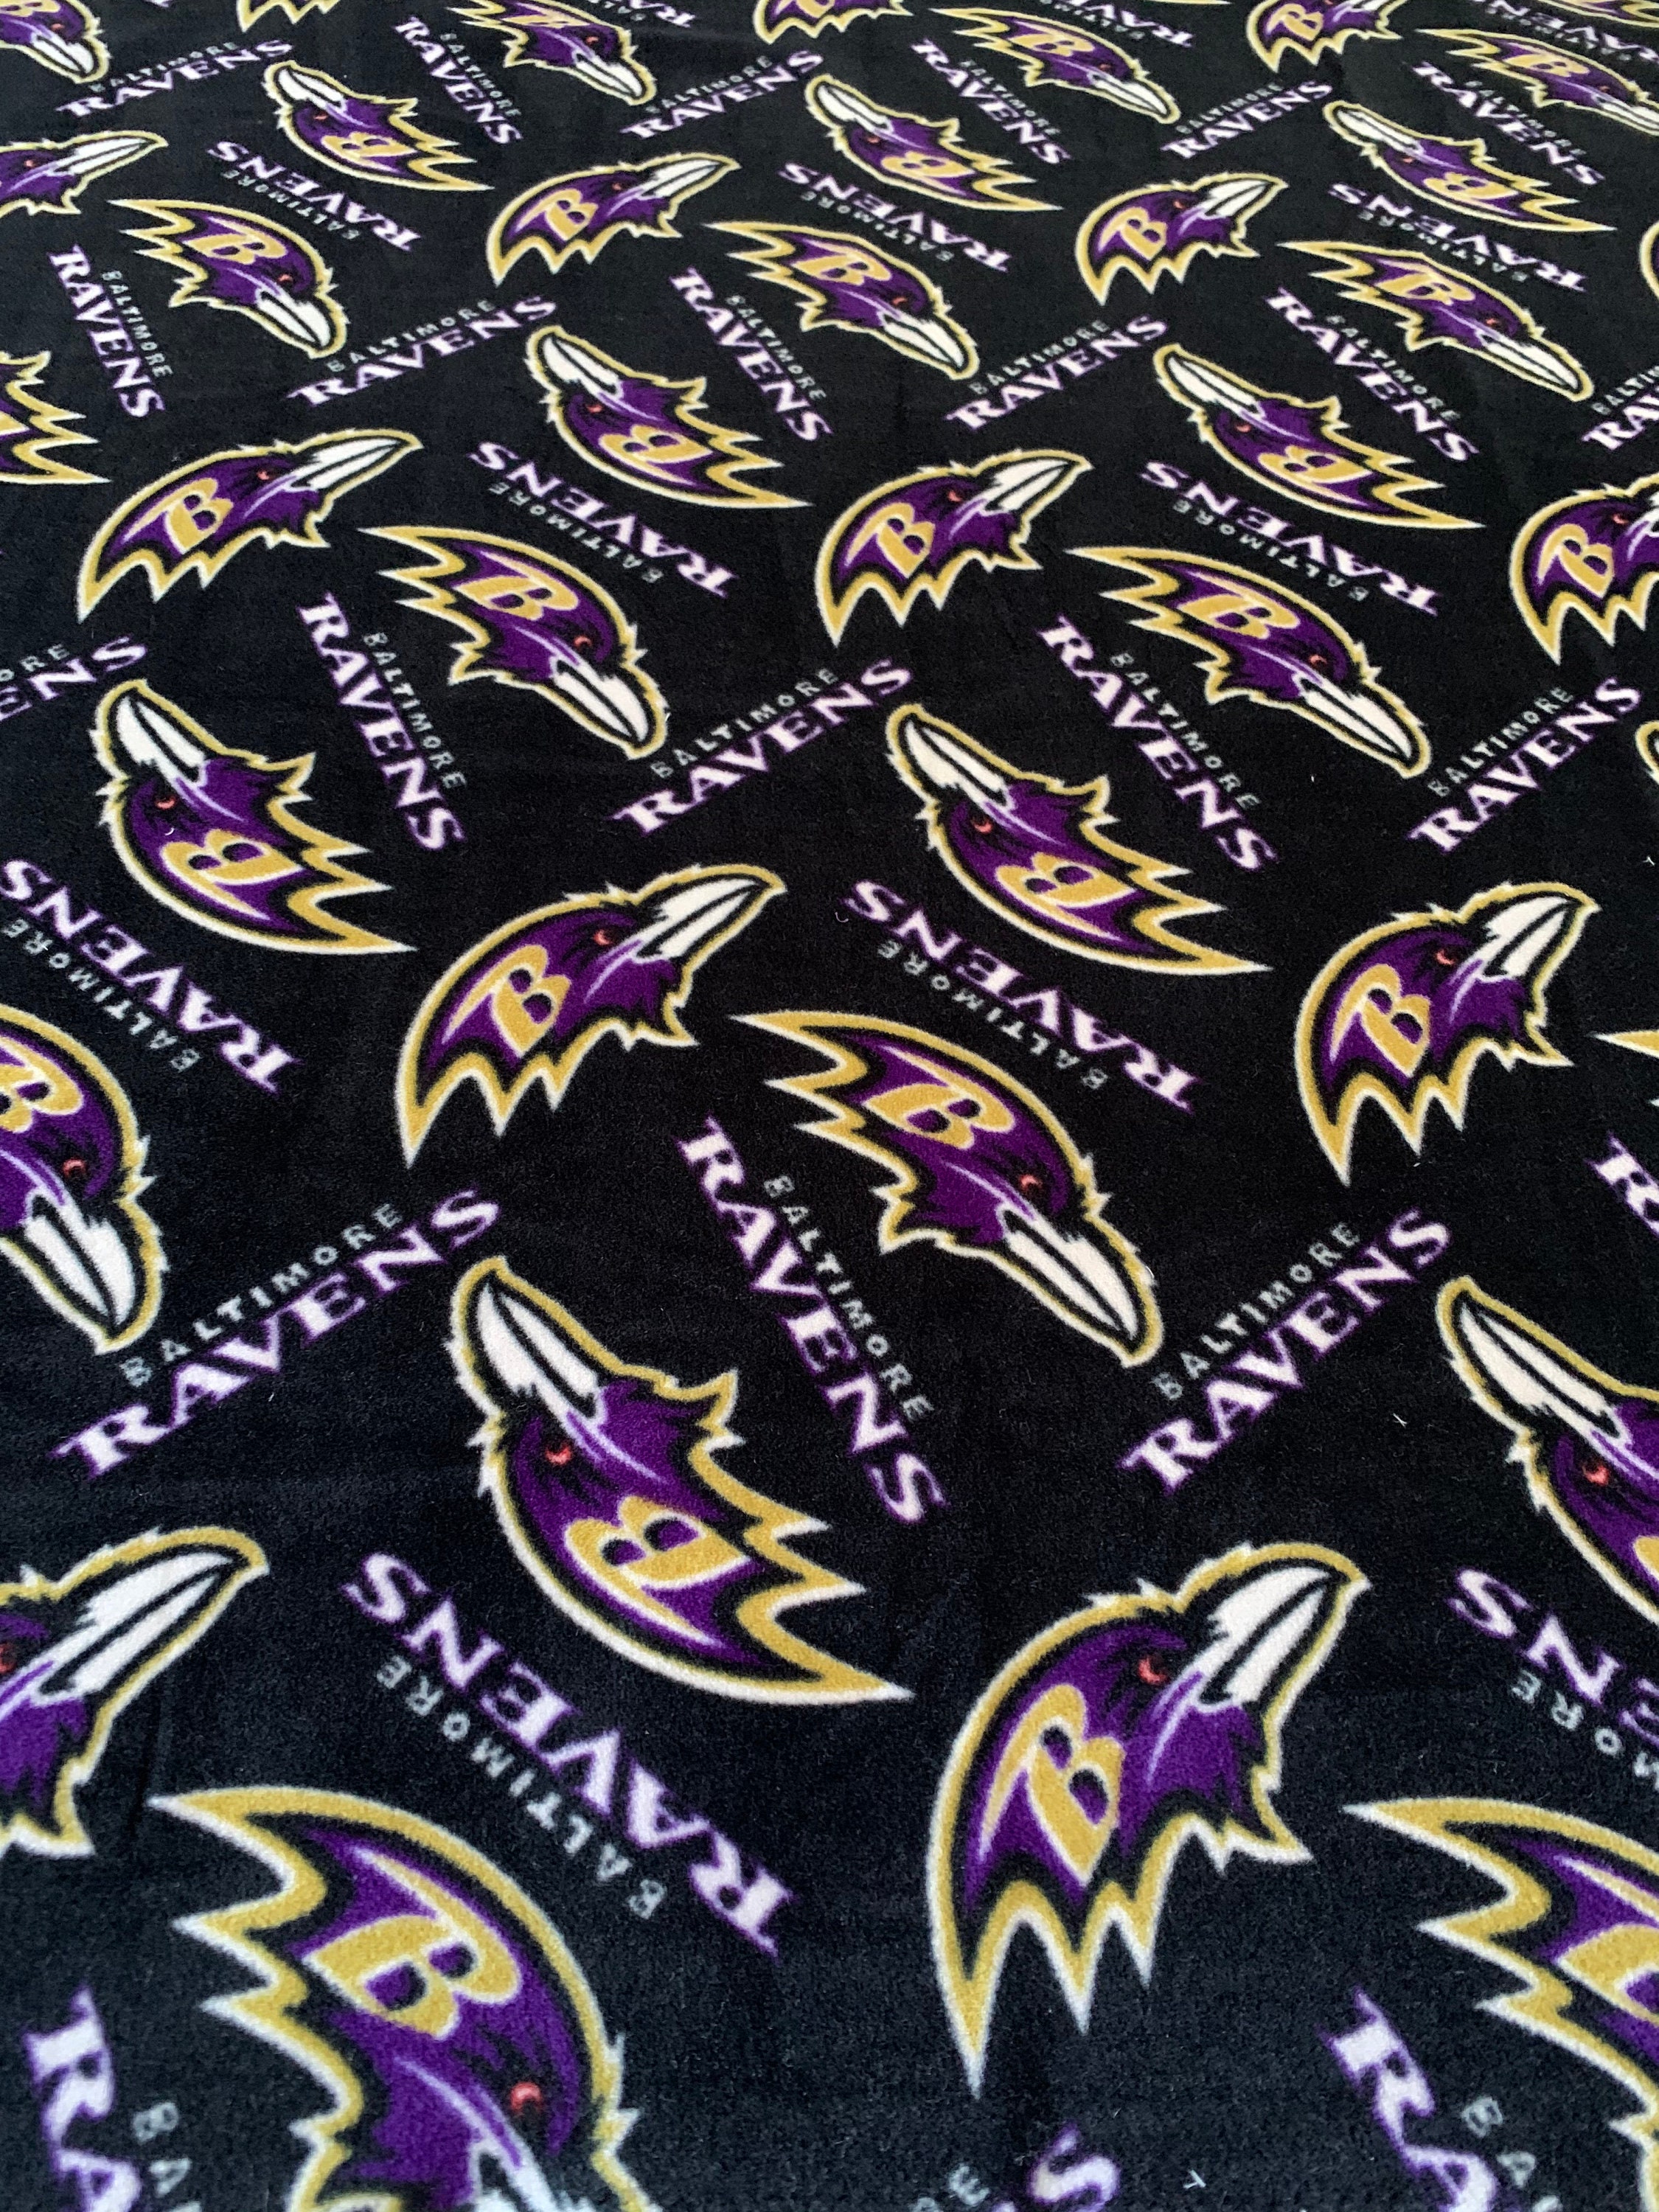 Baltimore Ravens NFL Distressed Design 43 Inches not 58-60 